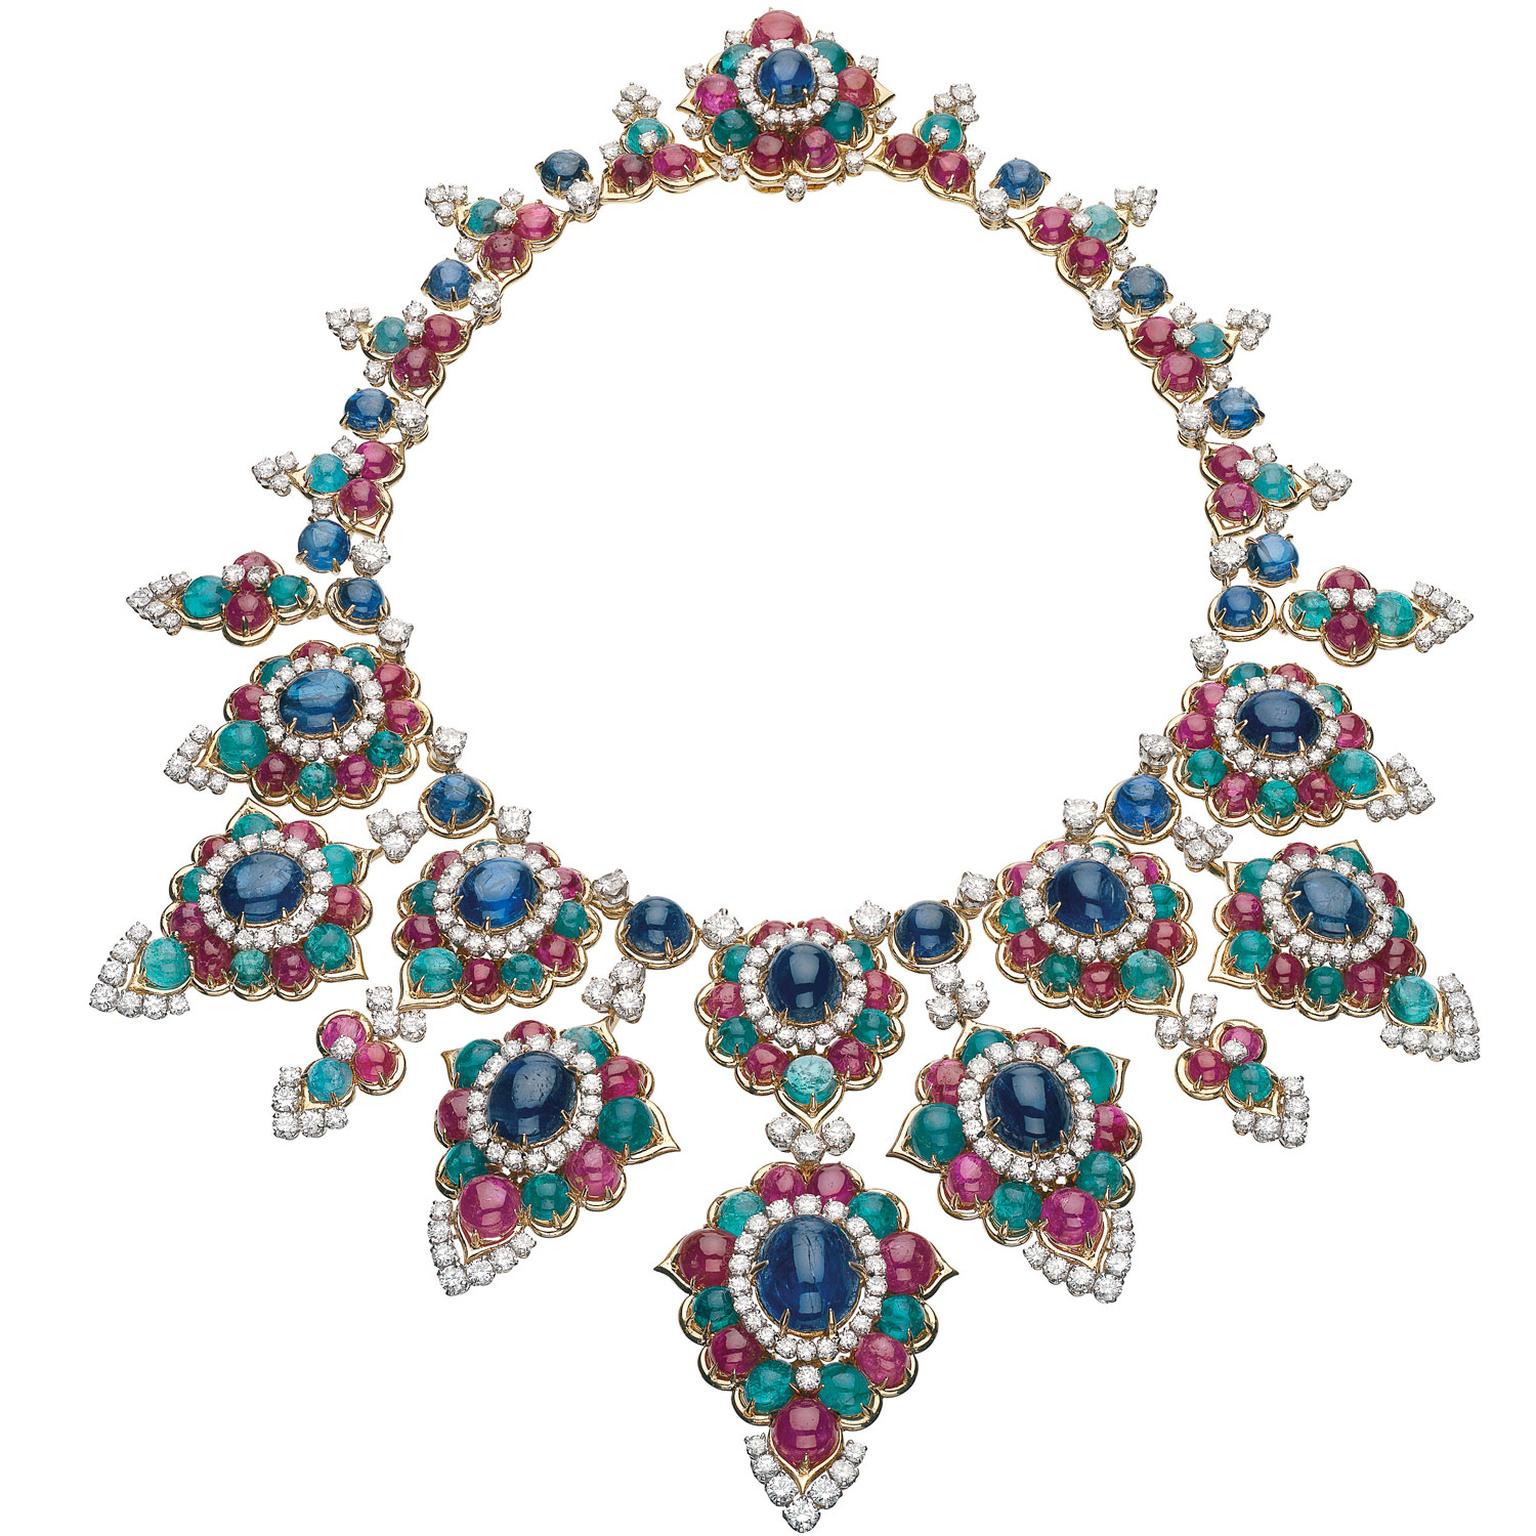 Gemstone necklace from the Bulgari heritage collection, 1967